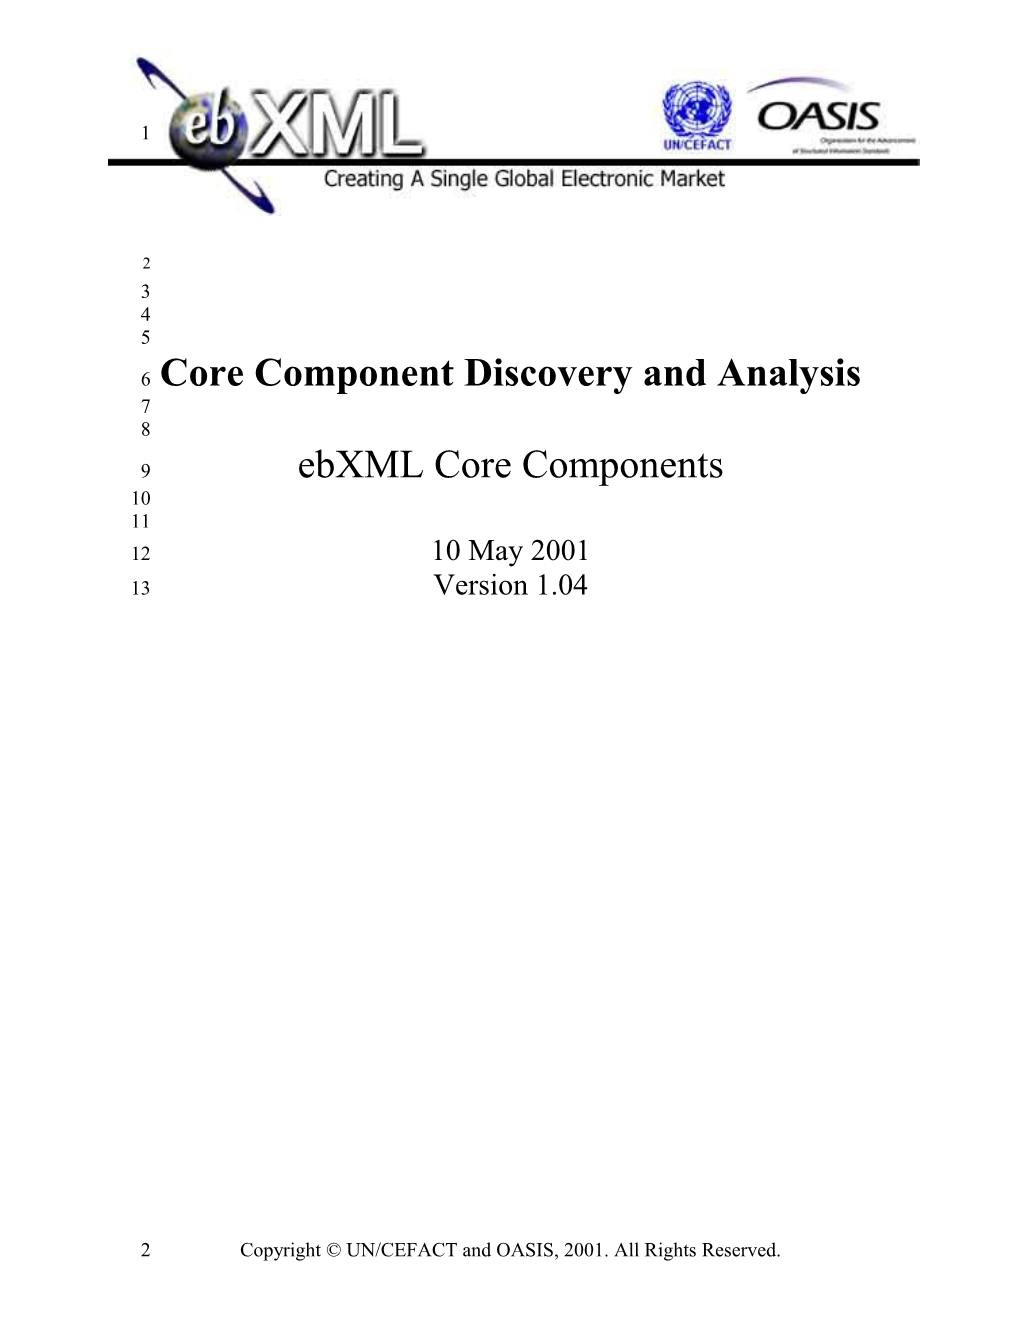 Core Component Discovery and Analysis